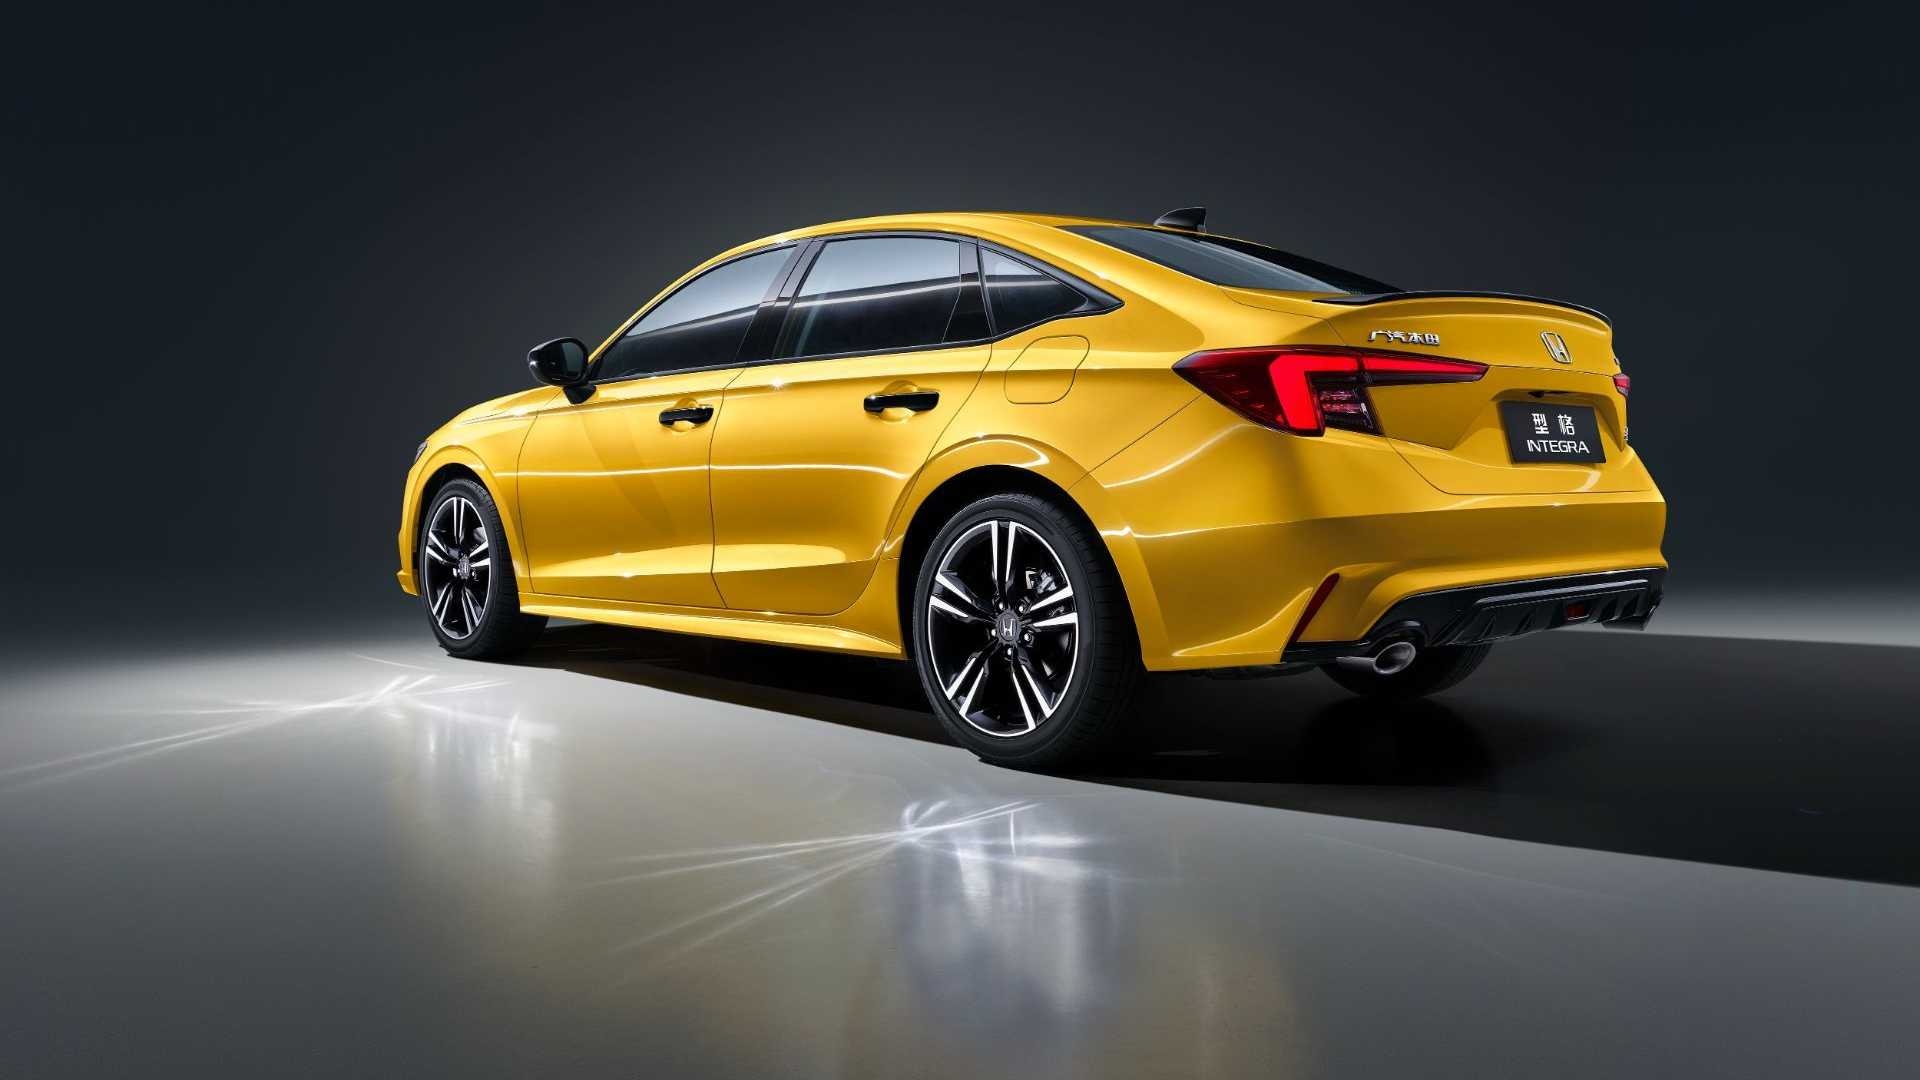 2022 Honda Integra Launched In China As Sportier-Looking Civic 1920x1080